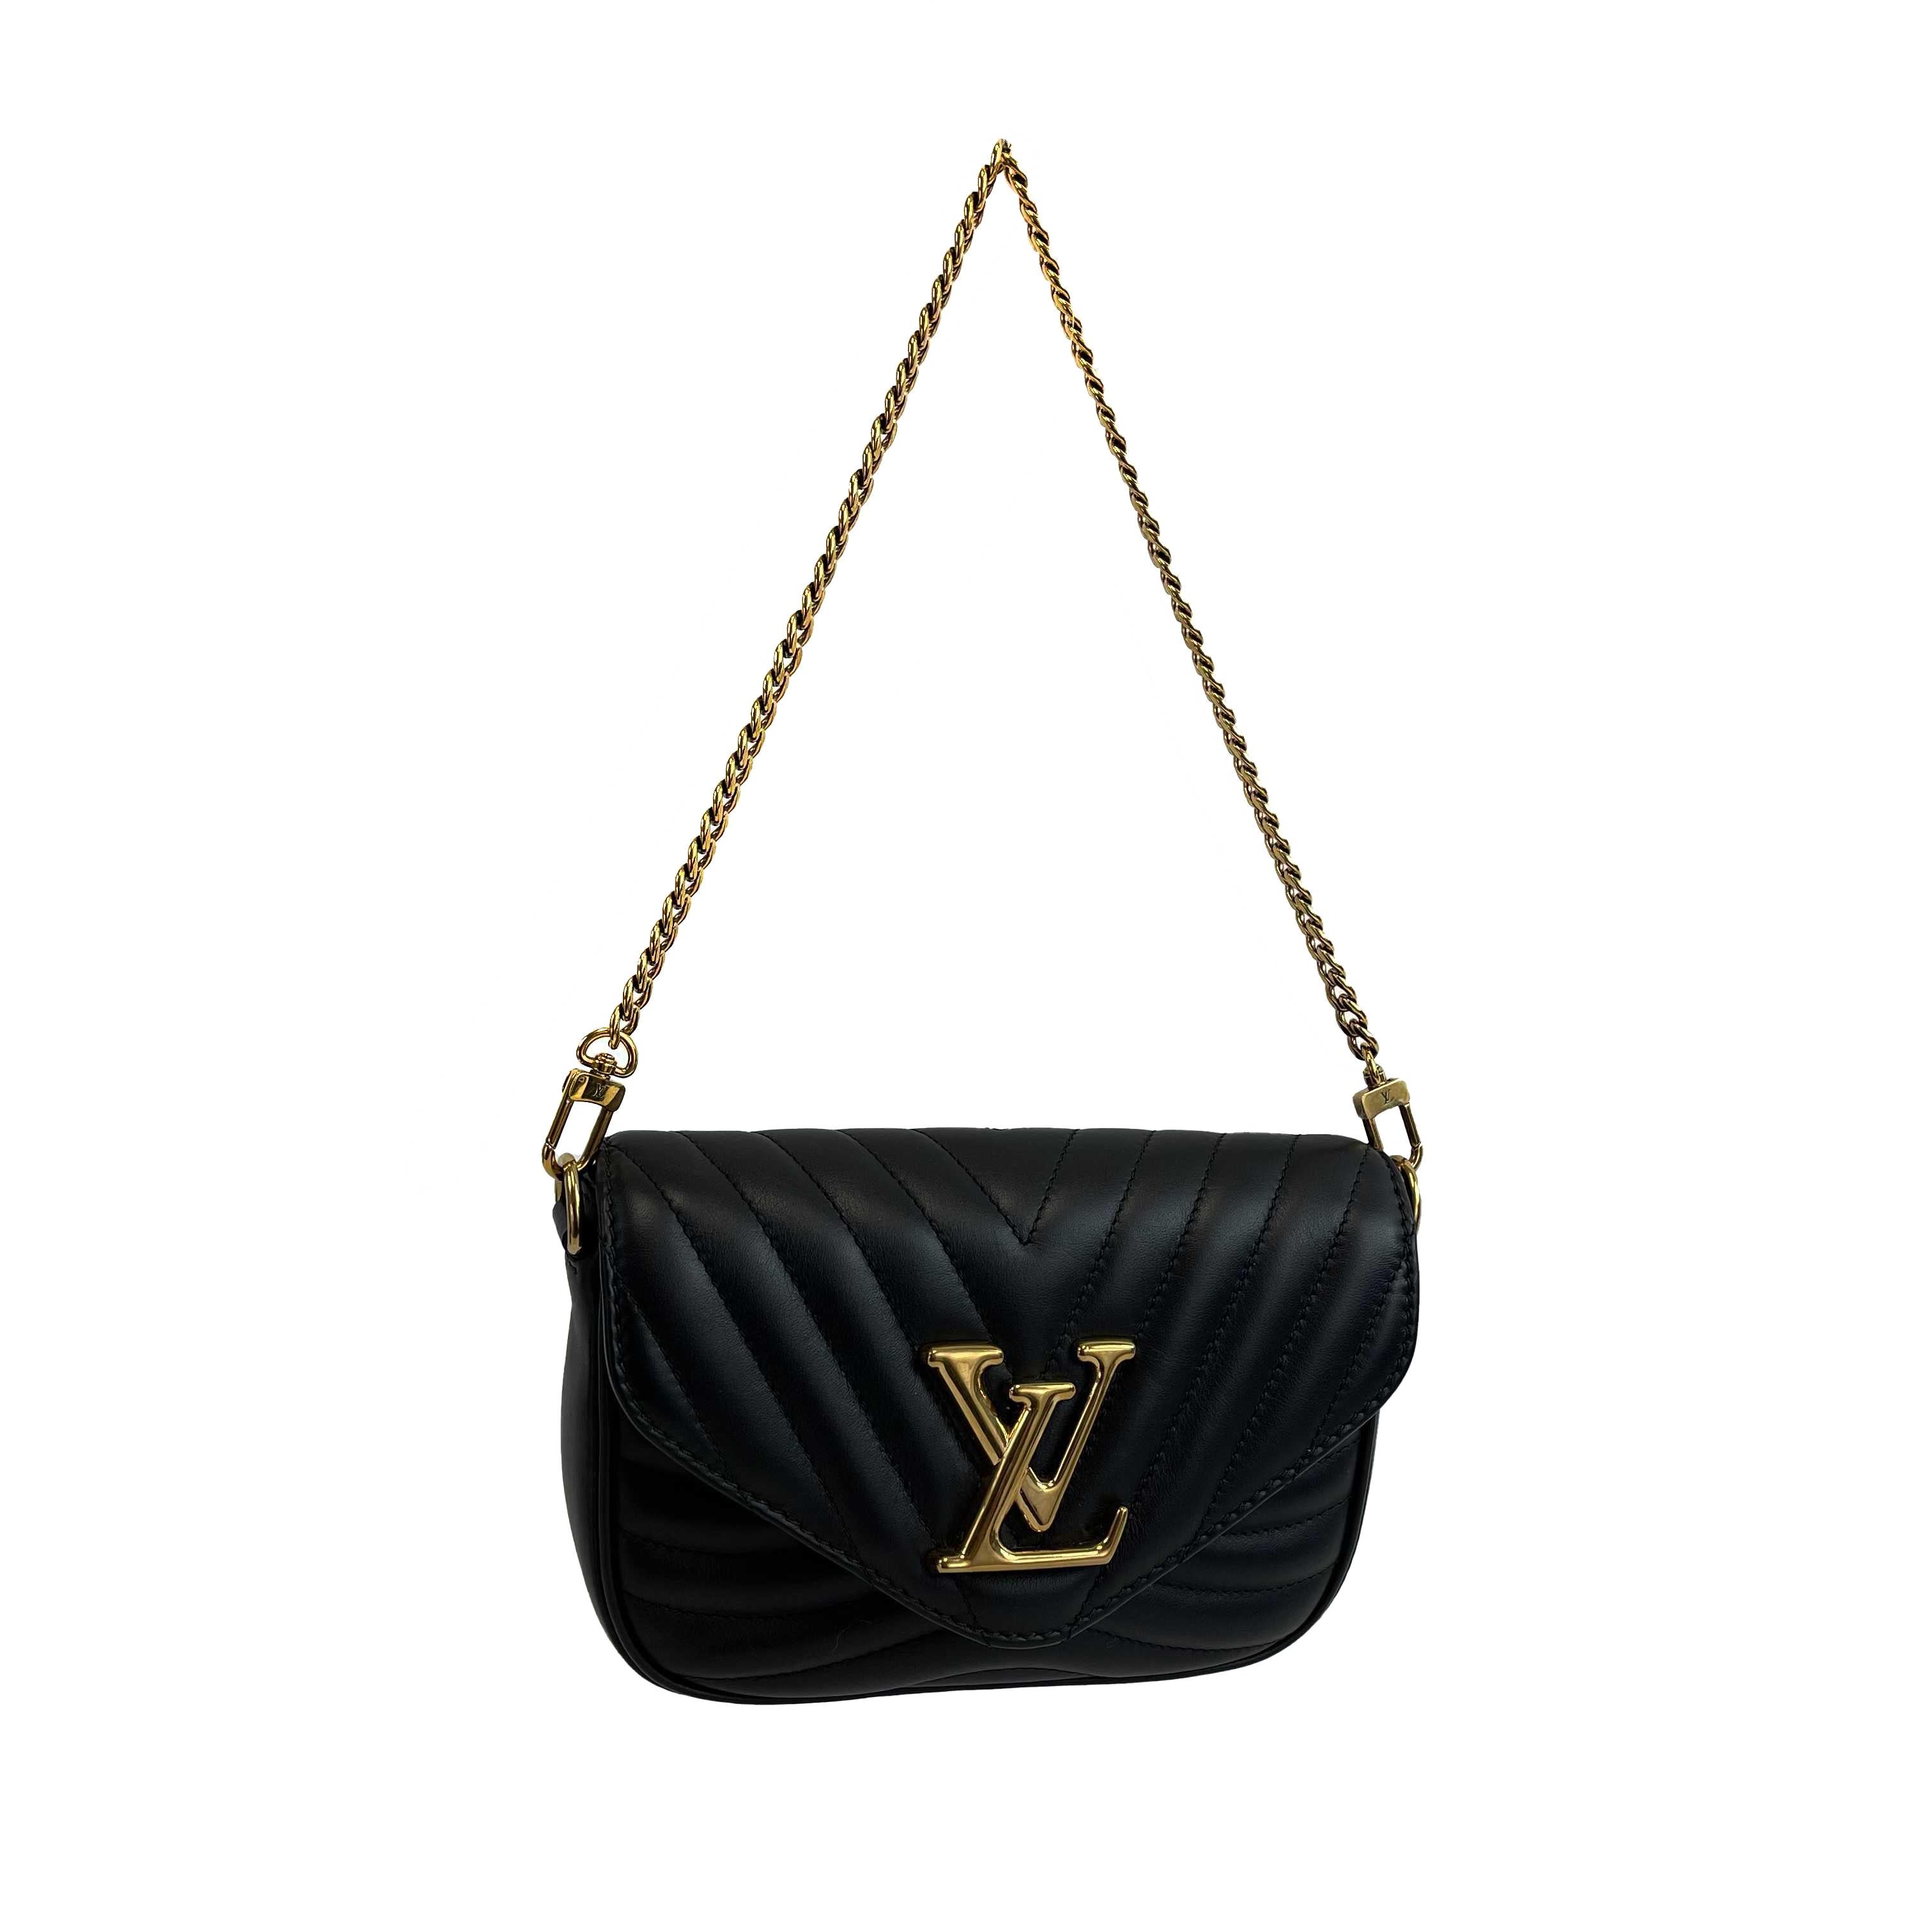 Louis Vuitton - New Wave Multi-Pochette Black Crossbody / Full Kit

Description

Smooth cowhide leather
Cowhide-leather trim
Microfiber lining
Vintage gold-color hardware
Interior flat leather pocket
Magnetic closure
Removable round coin